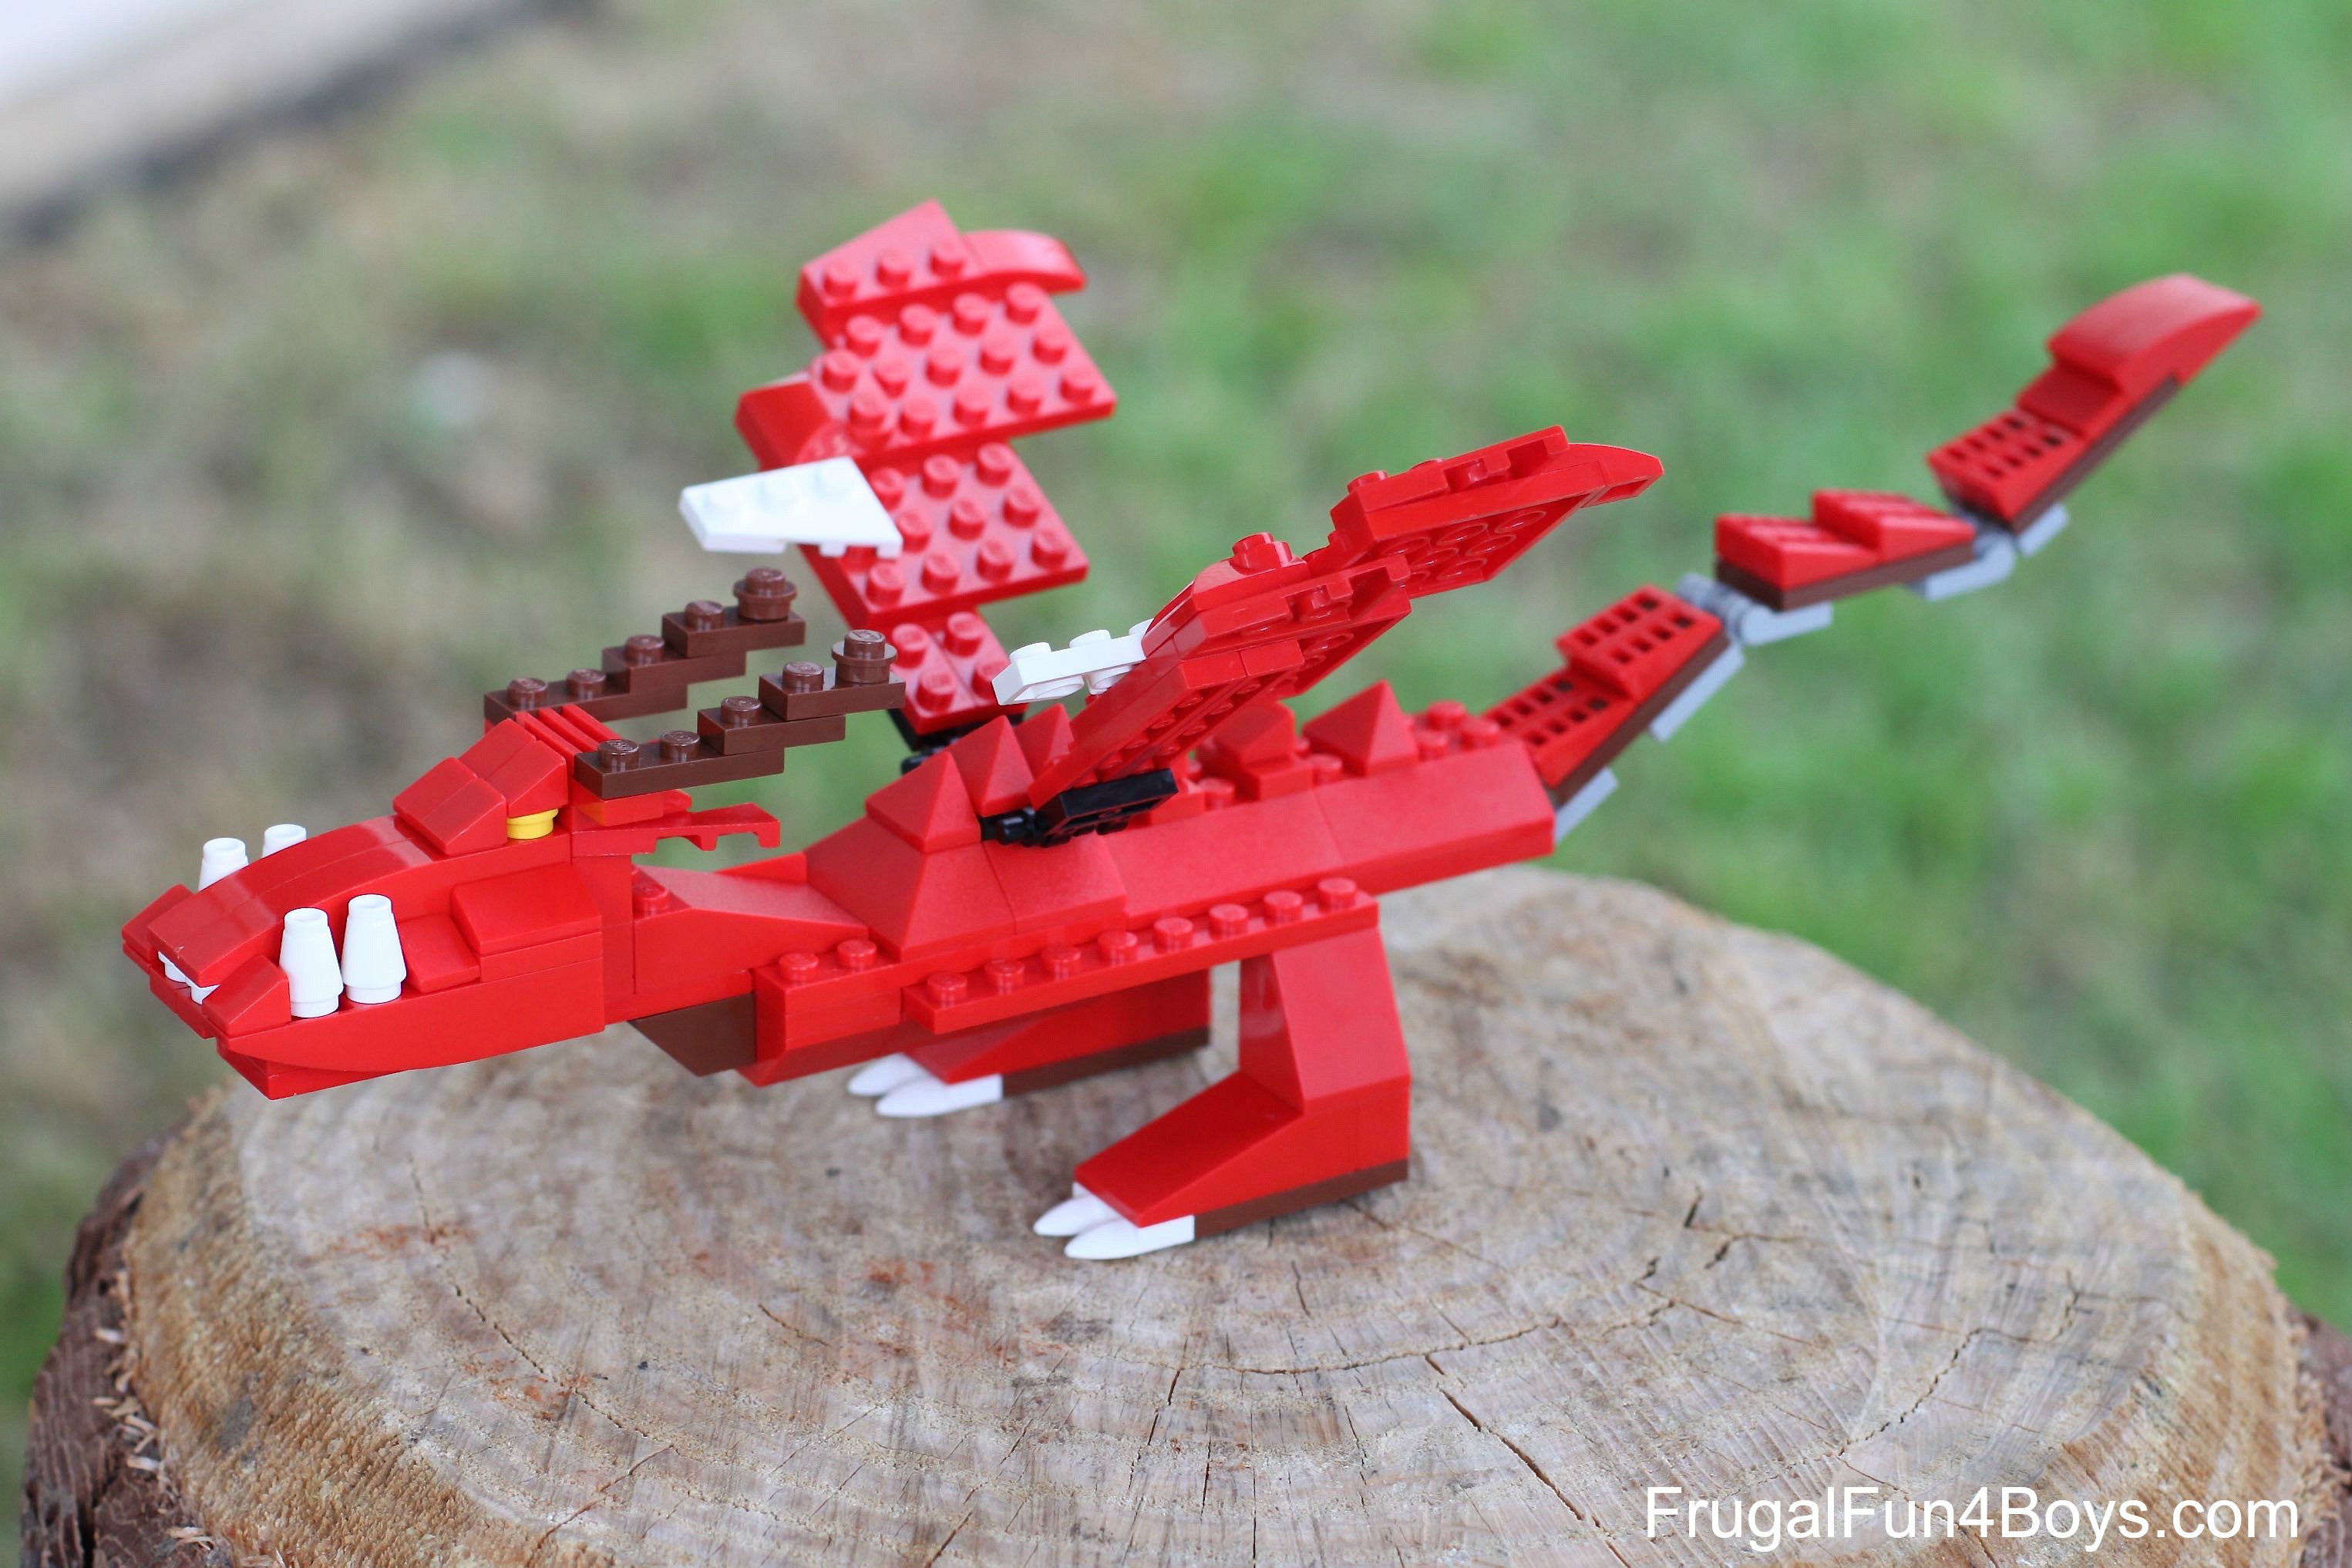 How to Build a LEGO Hookfang from How to Train Your Dragon